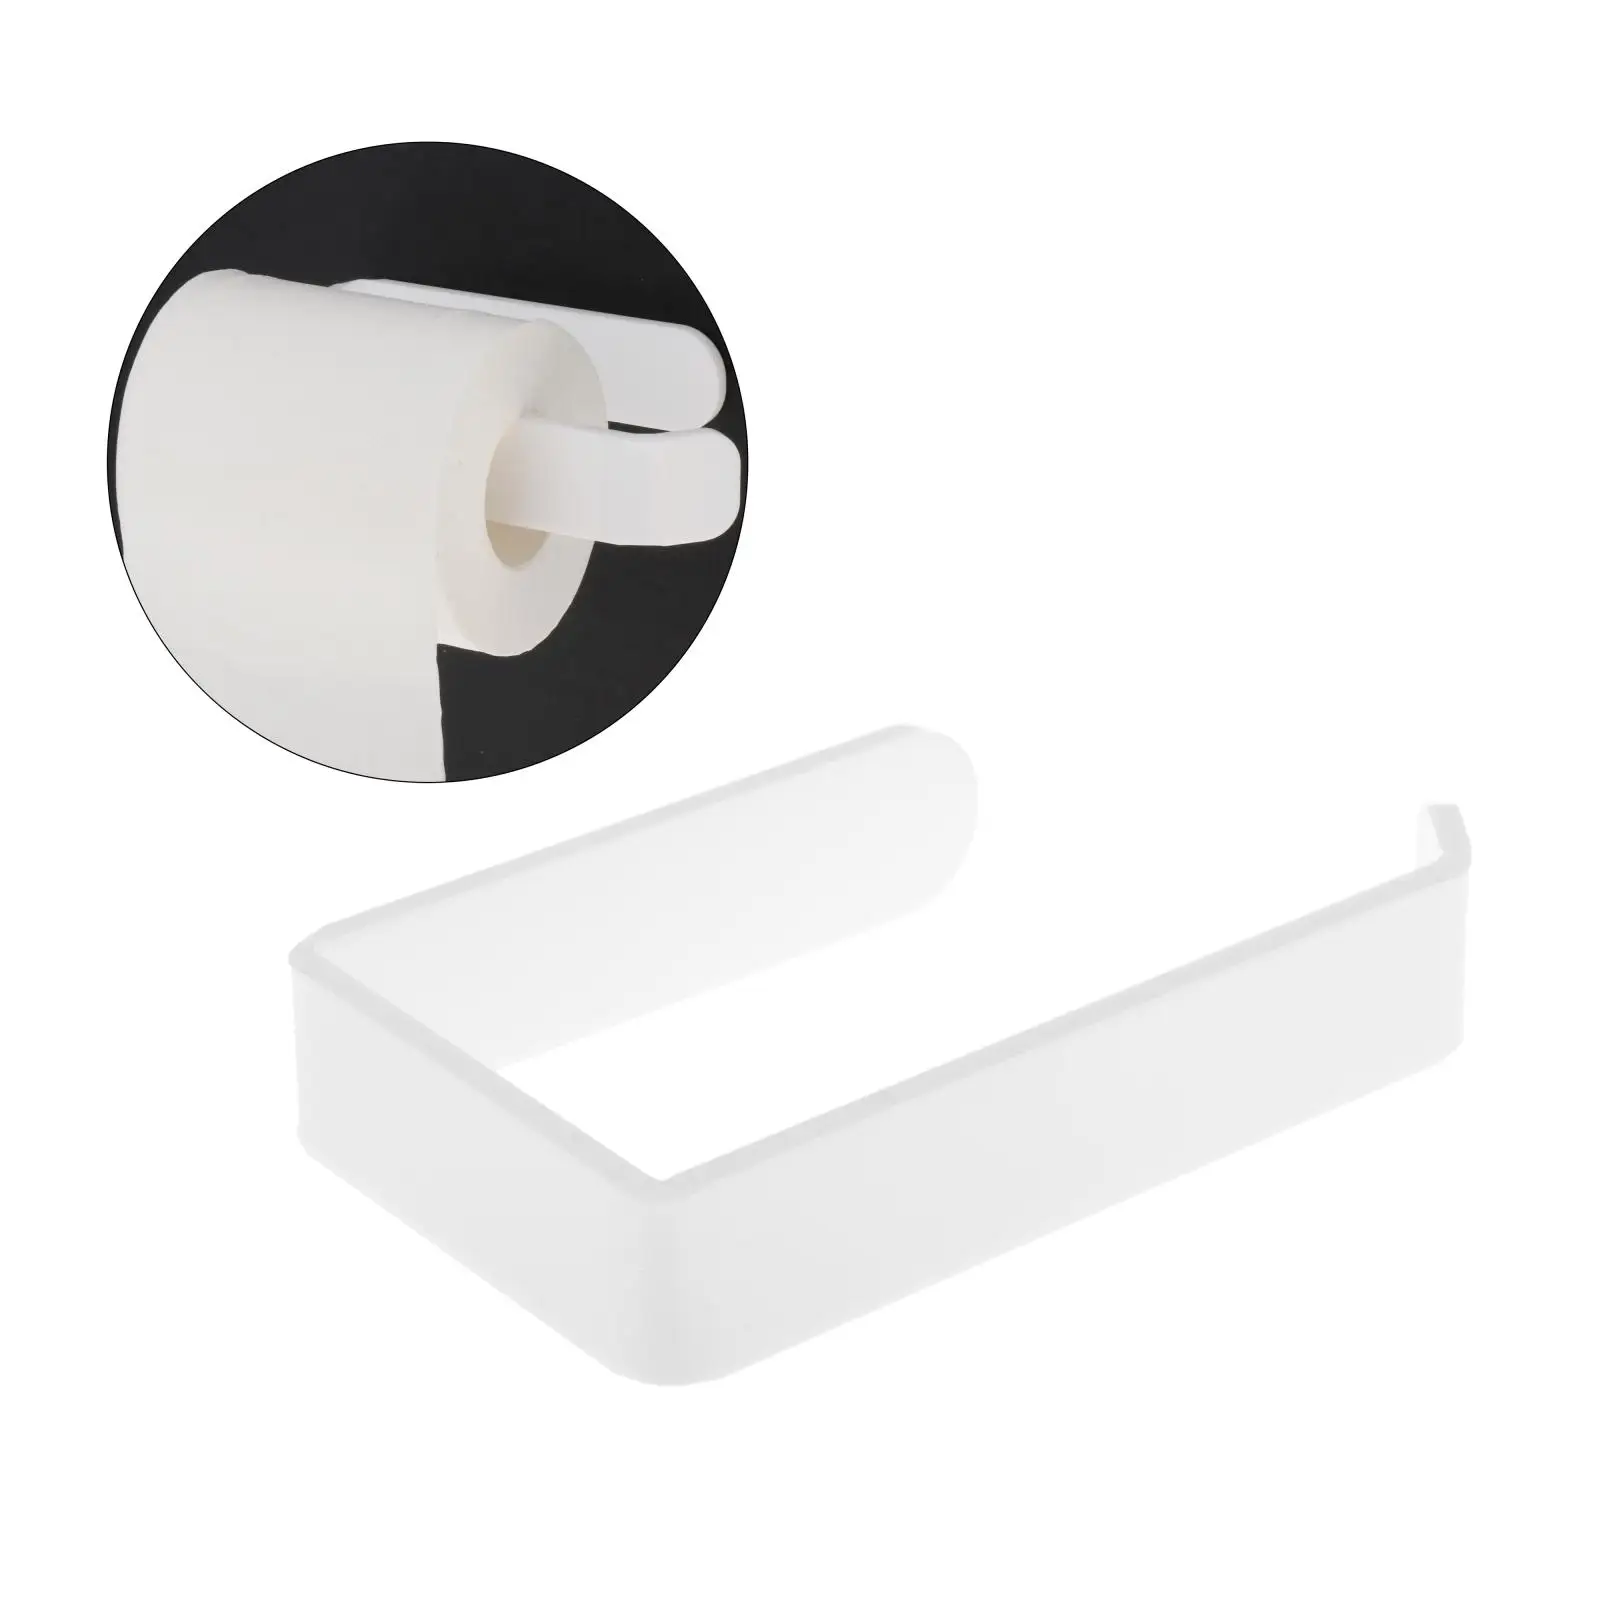 Wall Mount Paper Holder, White Acrylic Toilet Tissue Roll Holders Hangers, for Bathroom Kitchen, Easy to Install, for Wall Tile